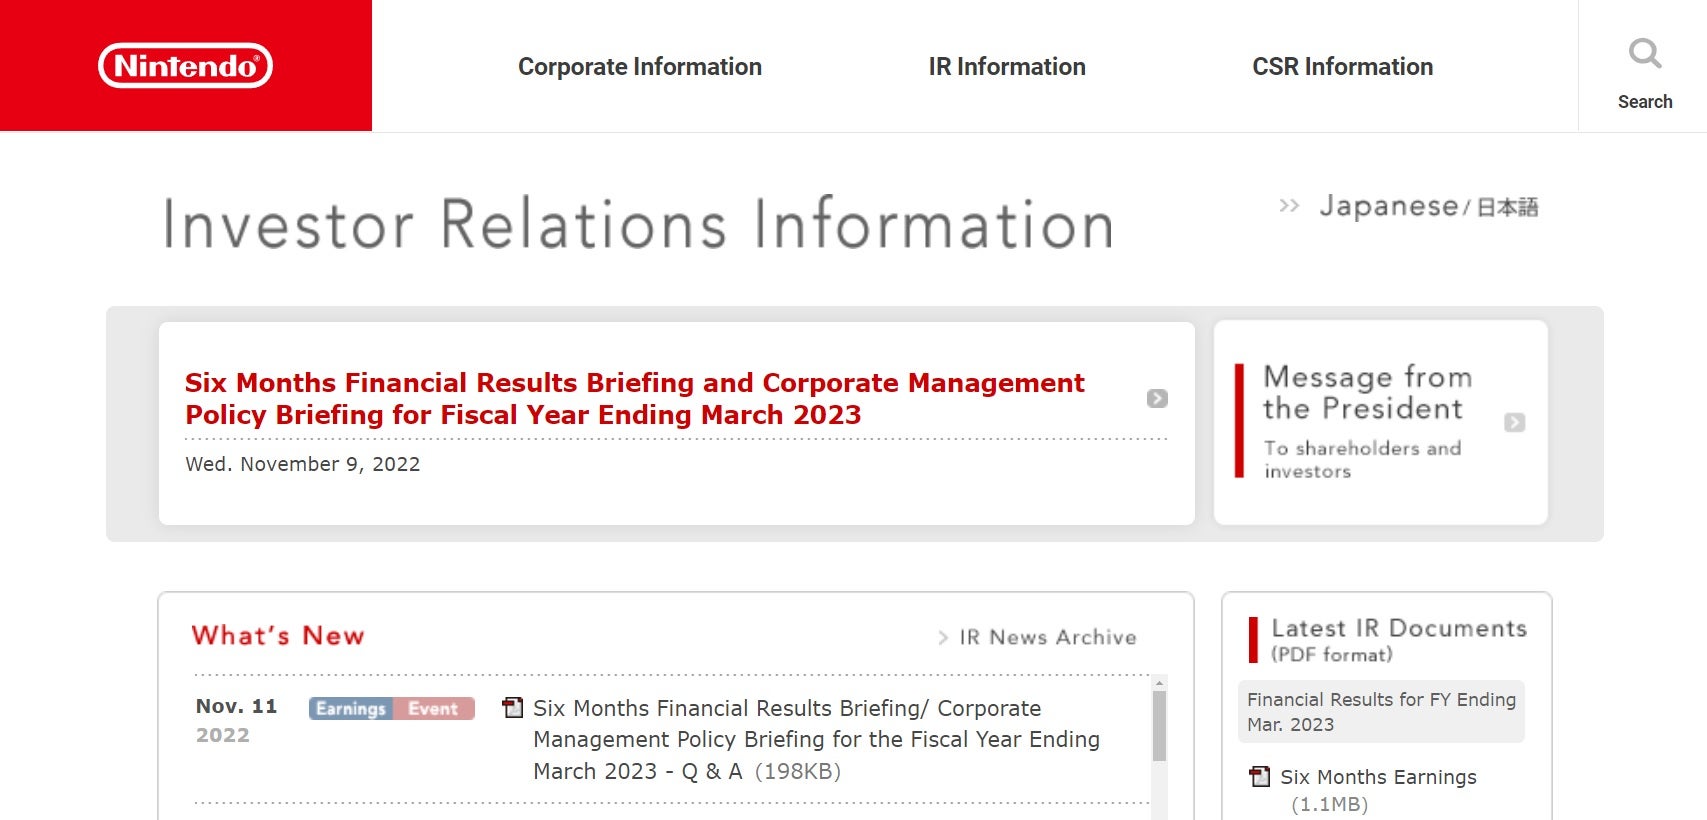 Nintendo's investor relations site. It's very simple, with minimal branding. And some of the text is fuzzy